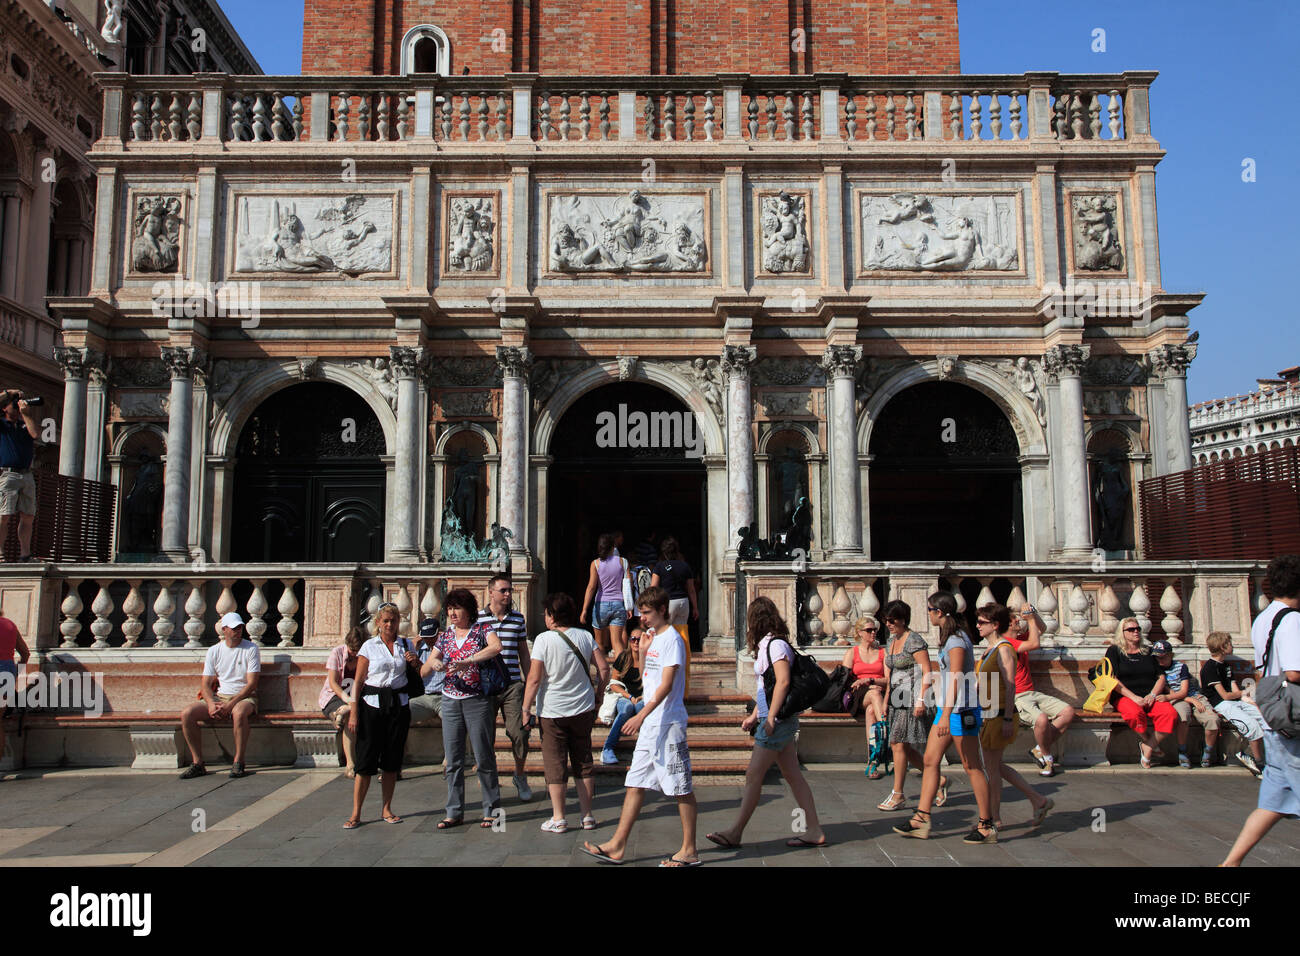 Italy, Venice, Piazza San Marco, Campanile entrance, people Stock Photo